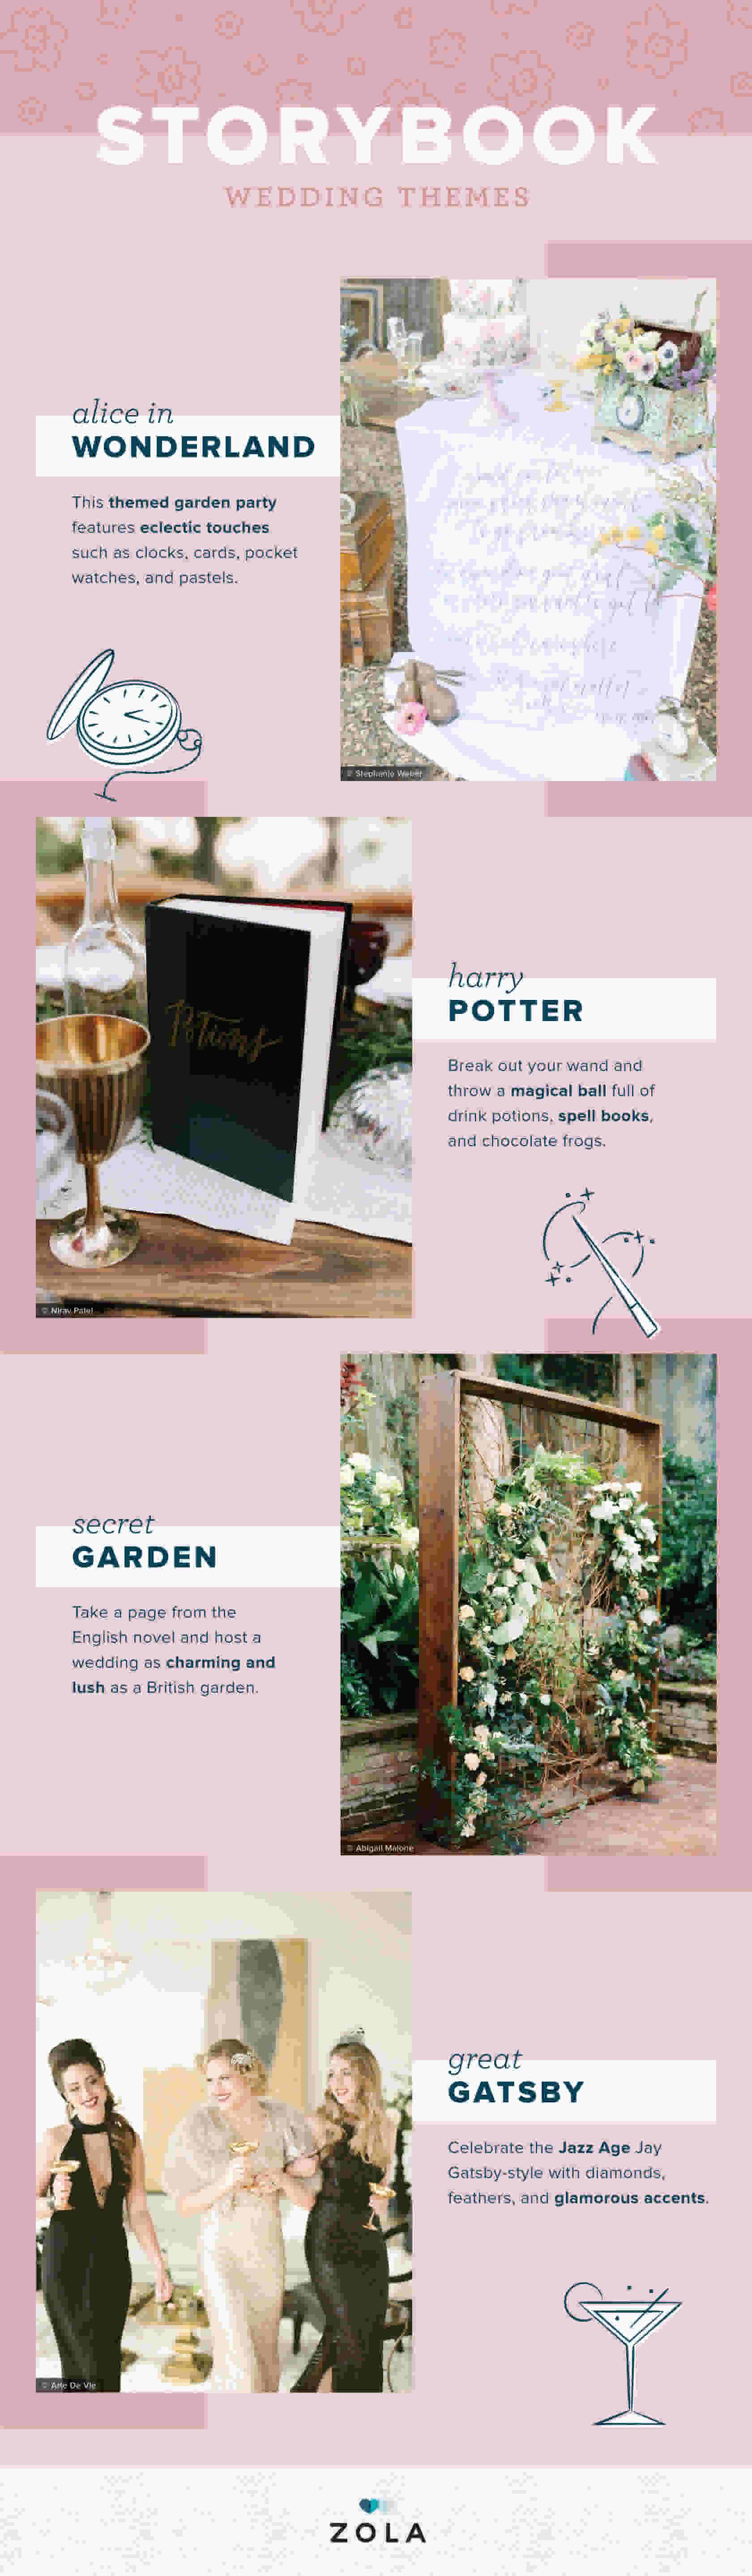 70 Wedding Themes To Inspire Every Type Of Couple Zola Expert